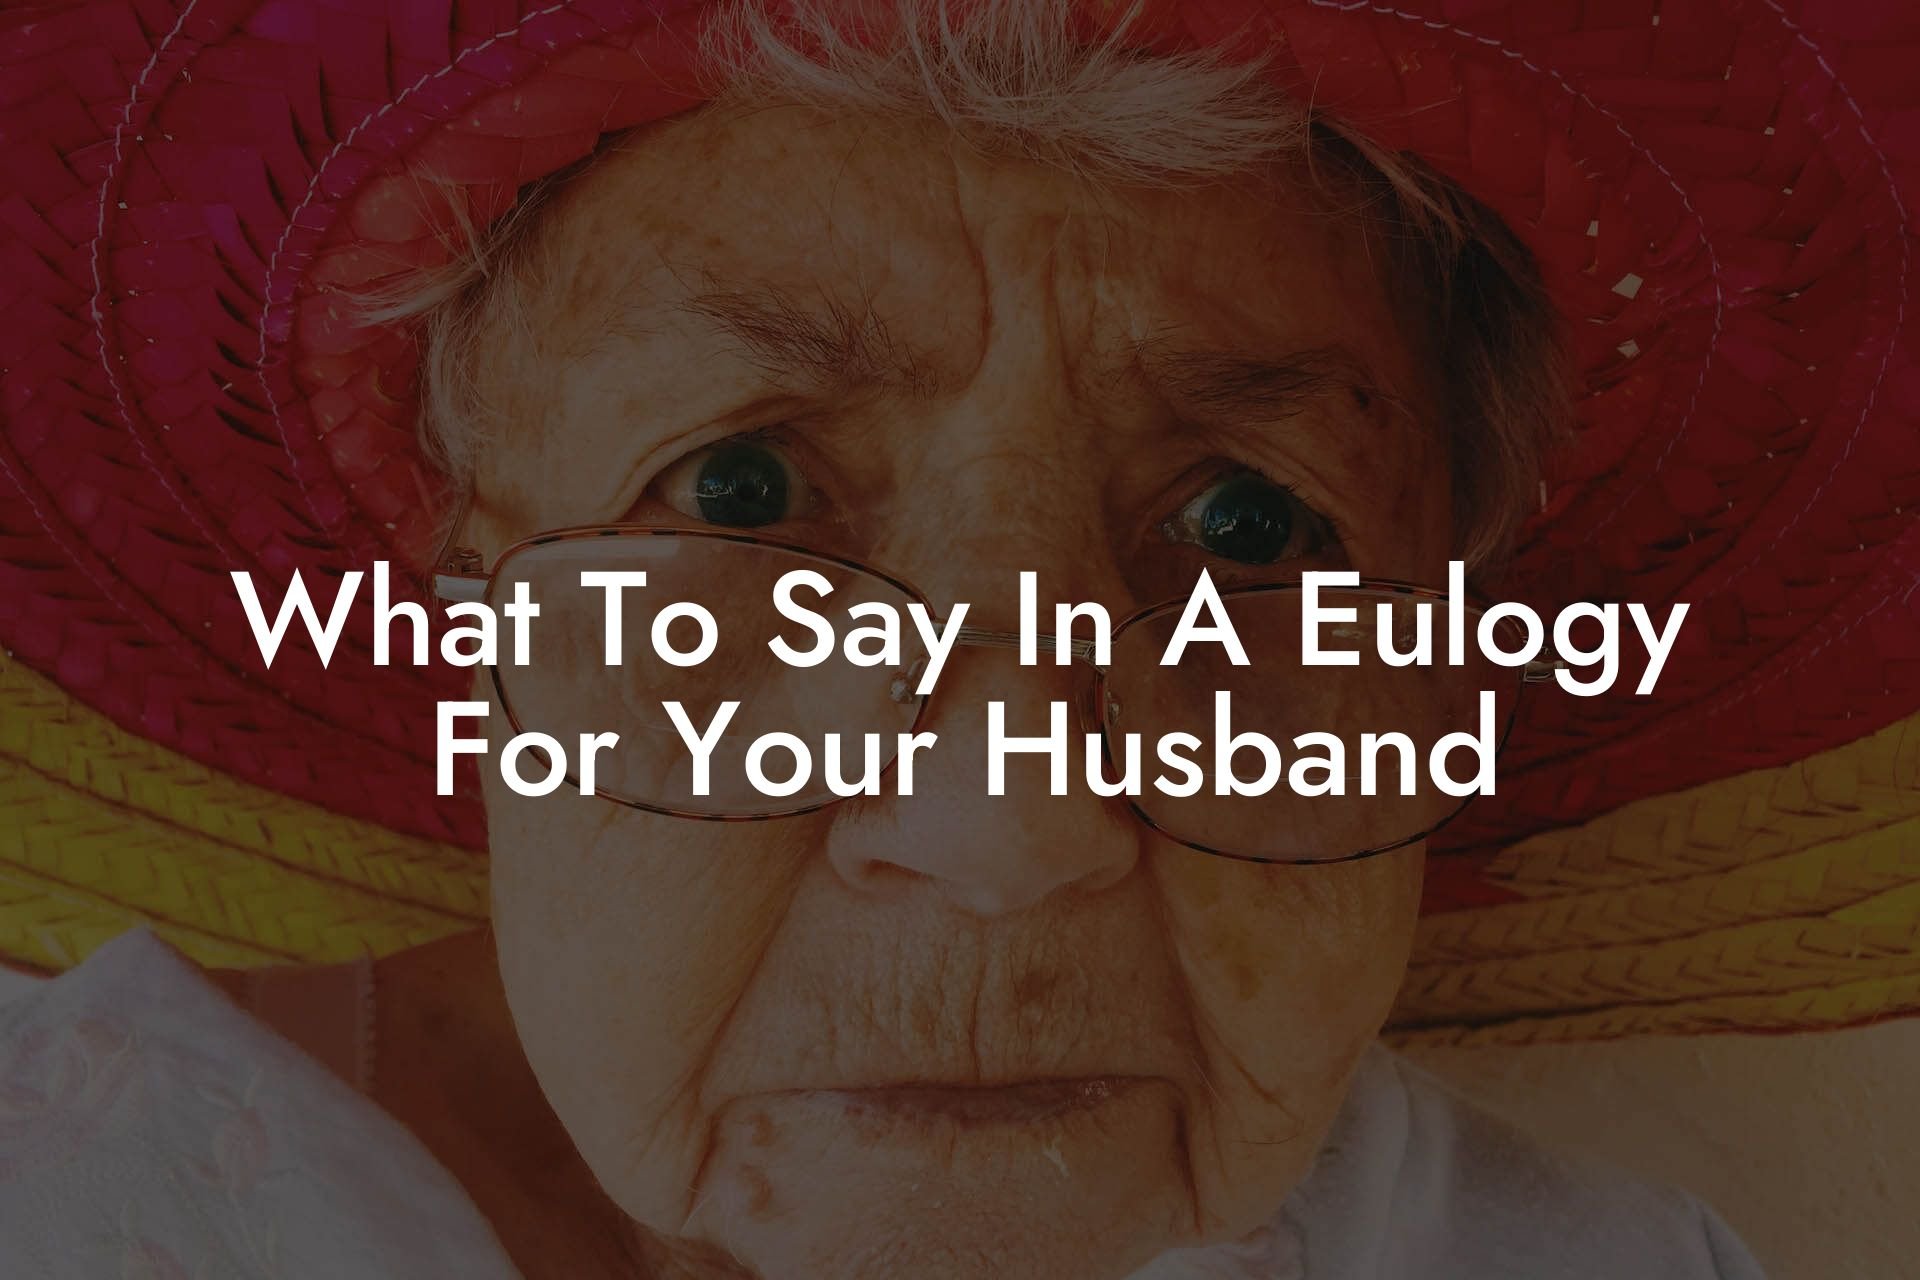 What To Say In A Eulogy For Your Husband